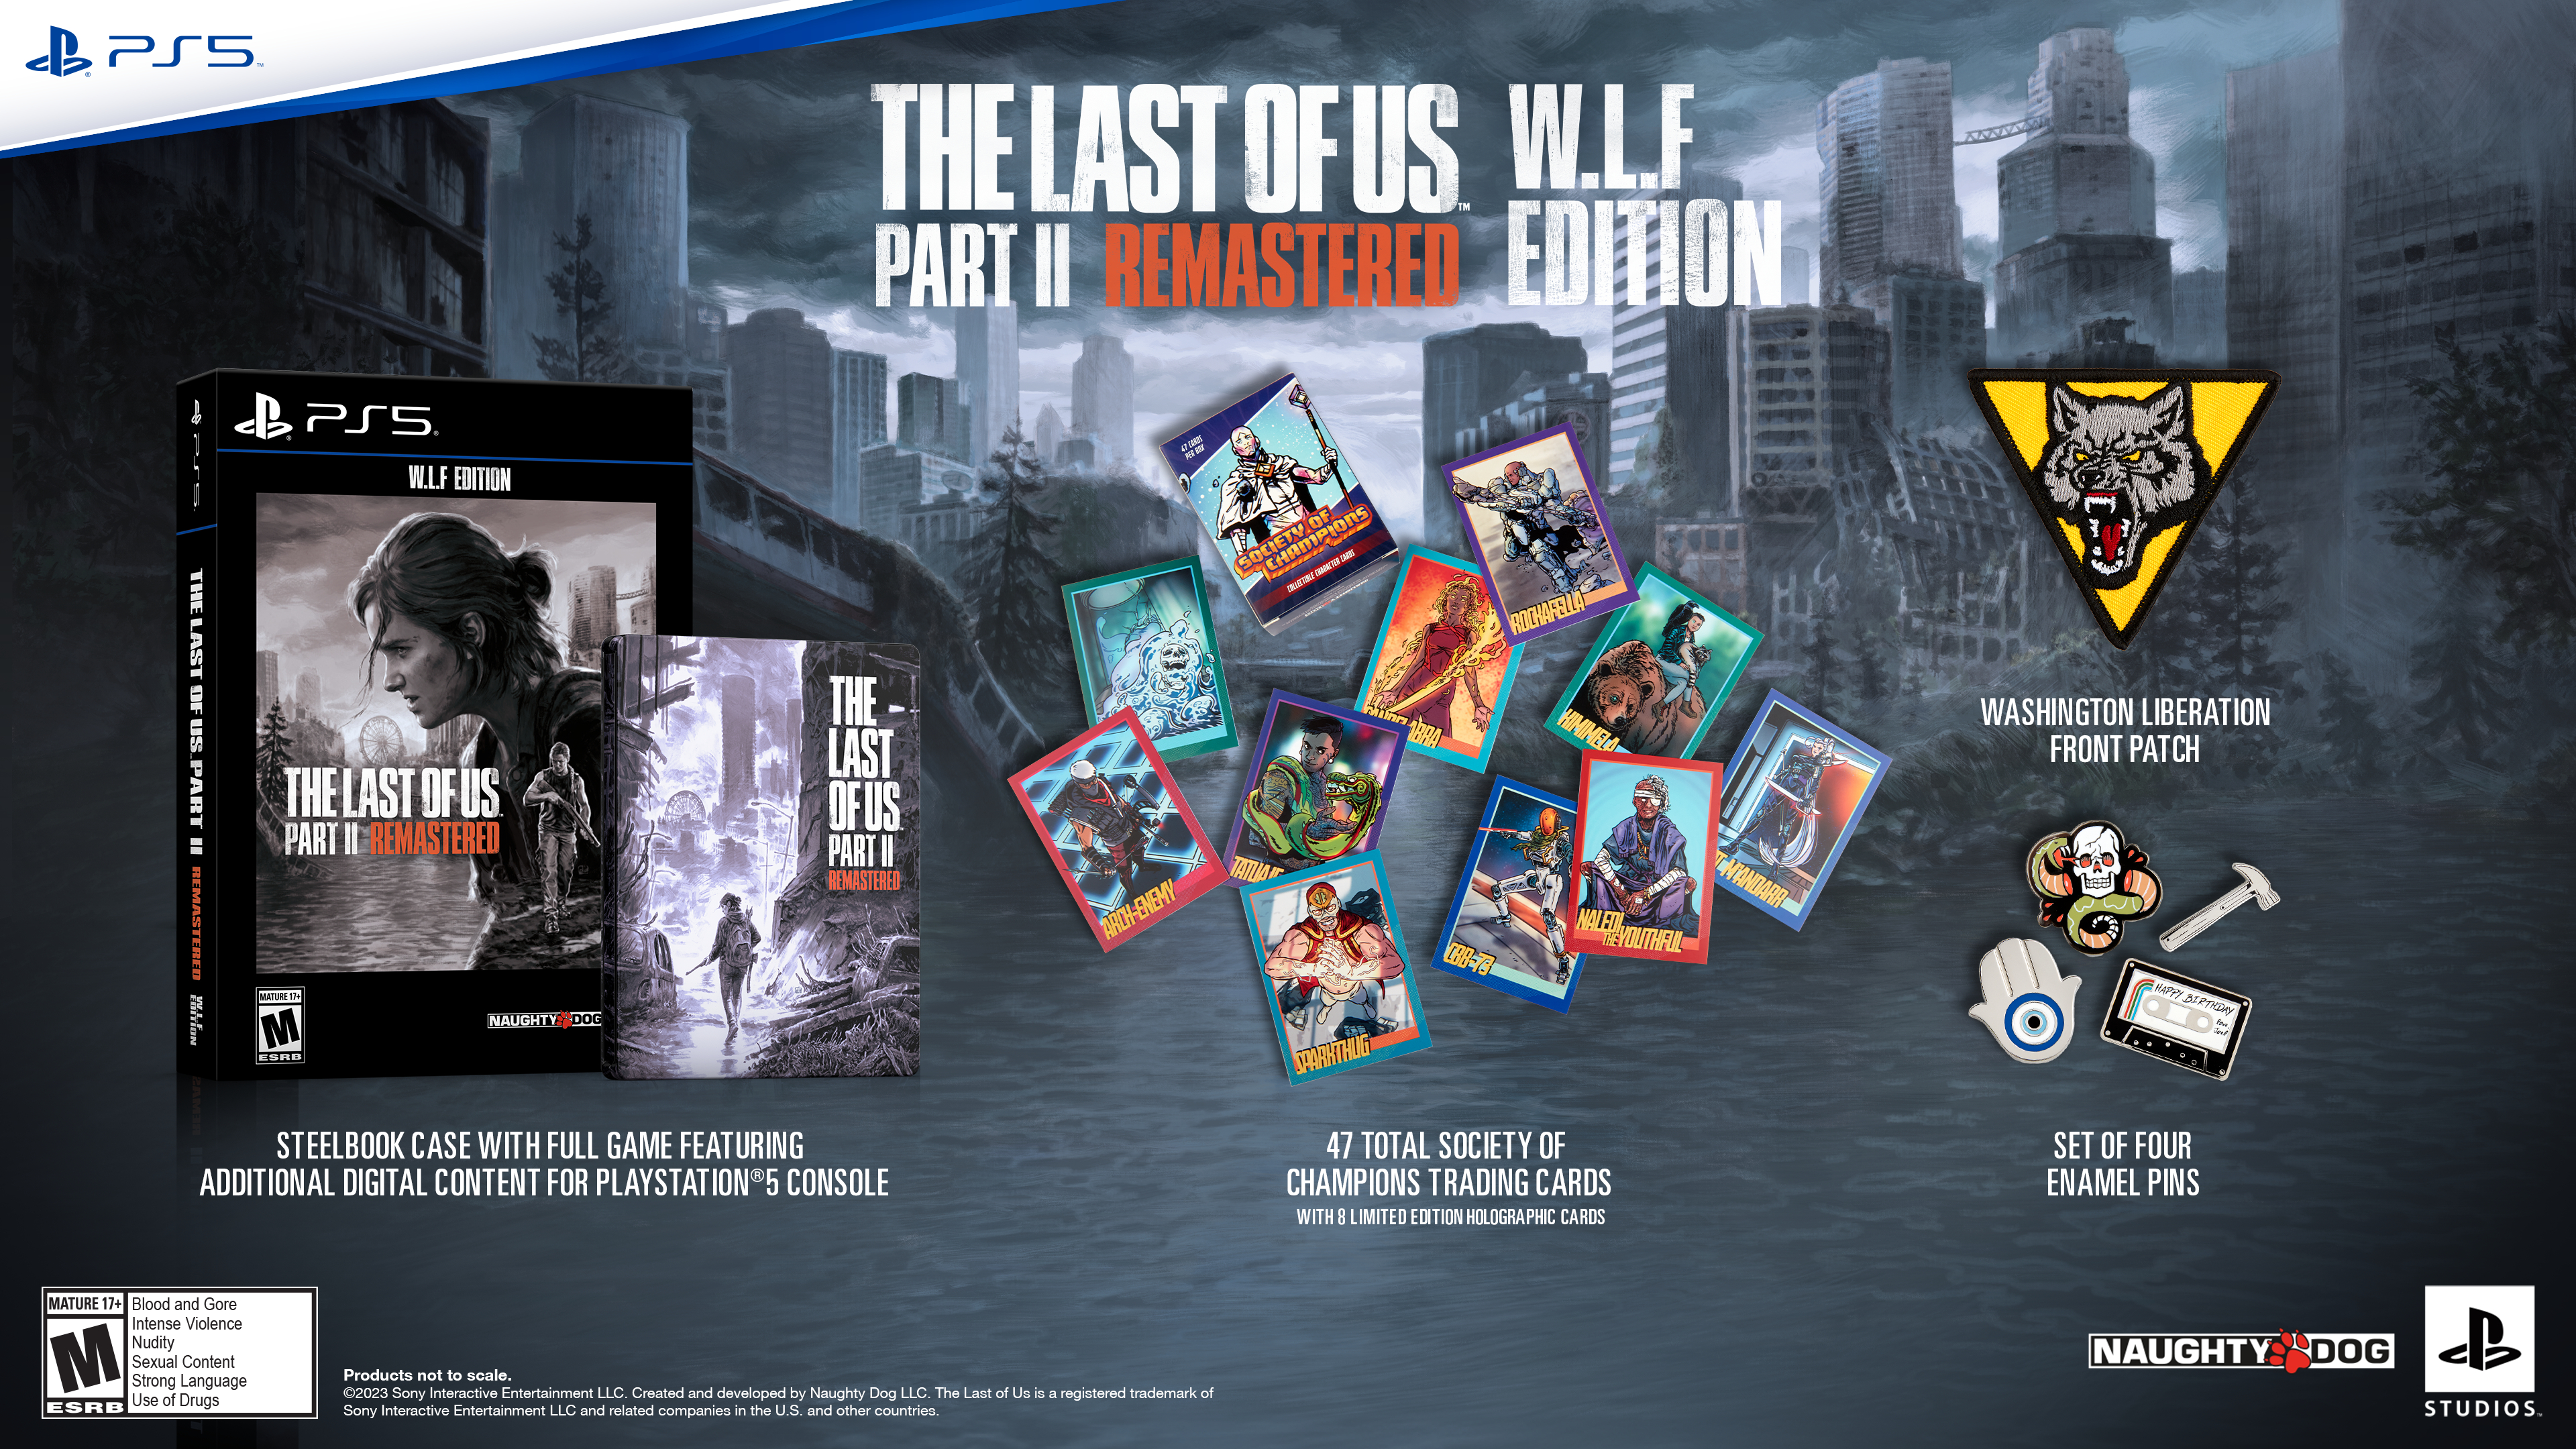 The Last of Us Part 2 Remastered WLF Edition contents